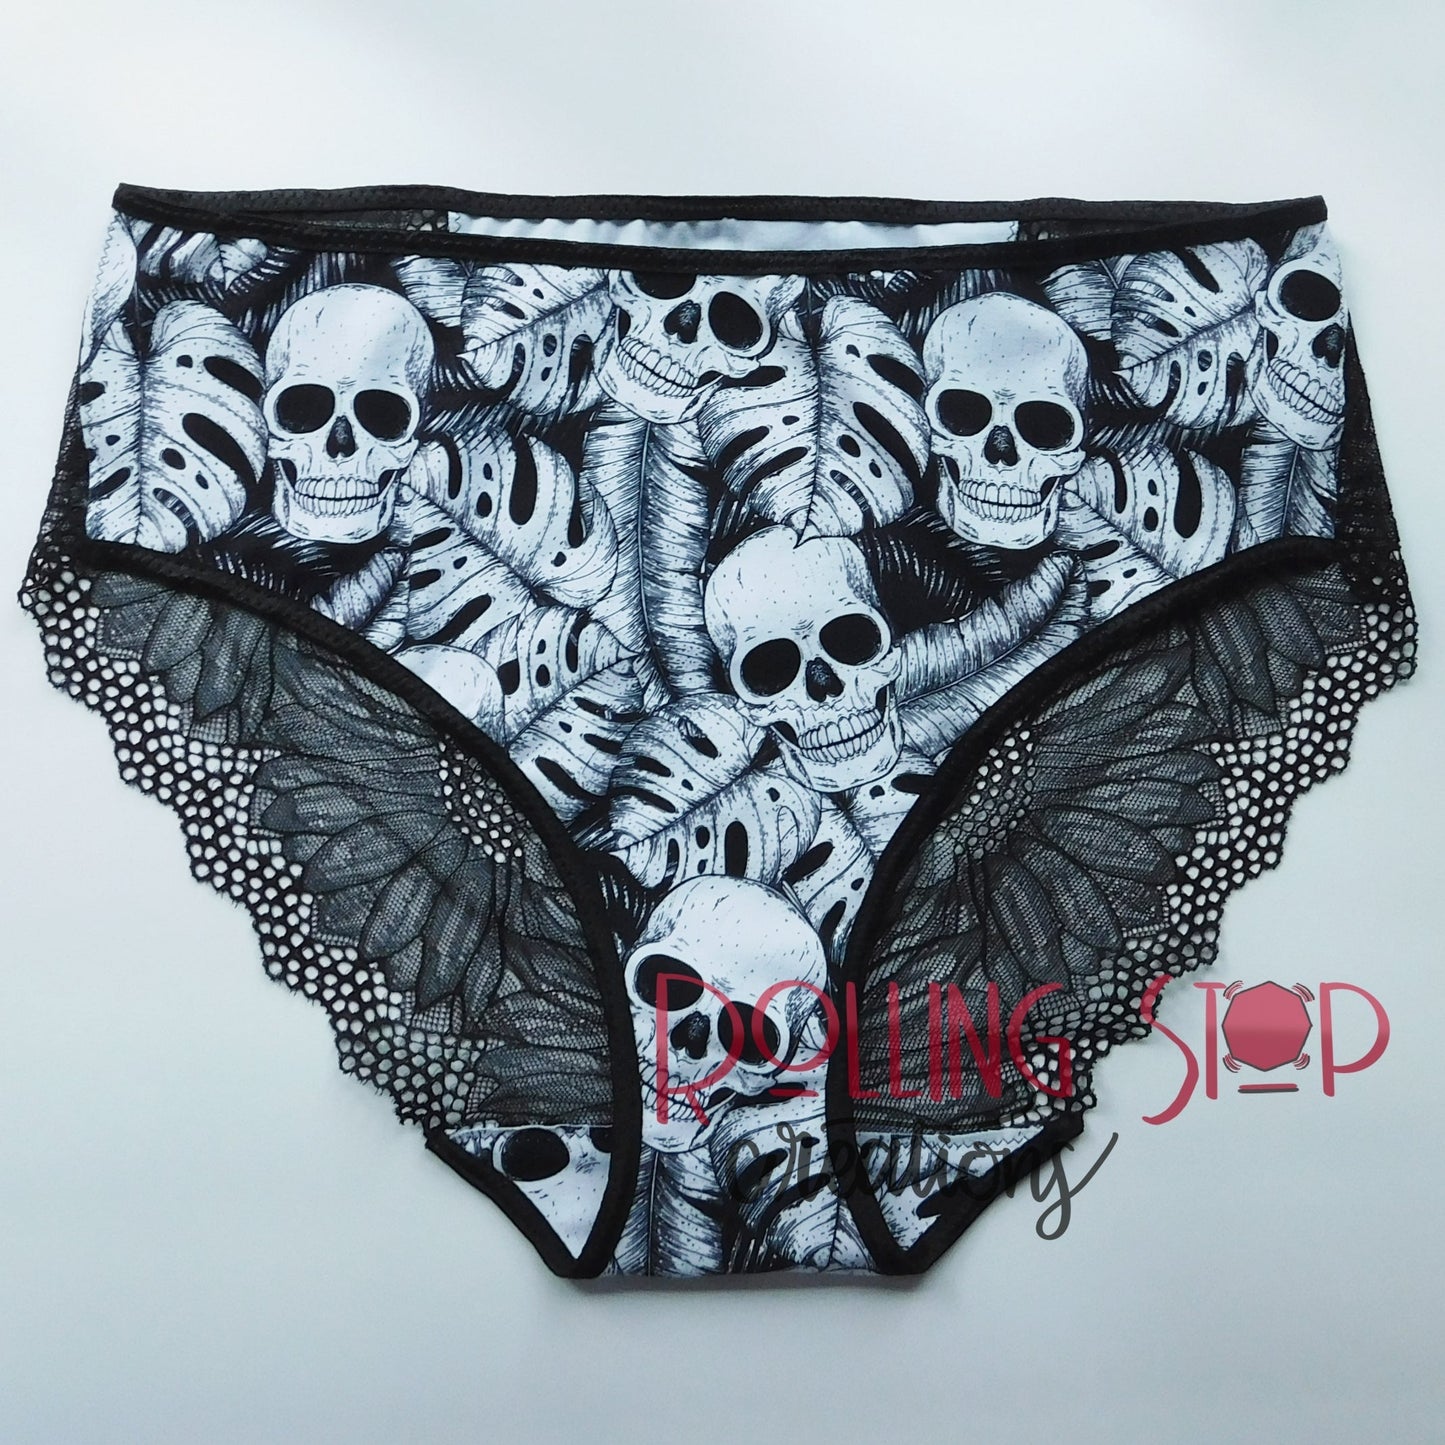 Pink Lemonade Skulls & Moths Lace Accent Pantydrawls by Rolling Stop Creations sold by Rolling Stop Creations Jundies